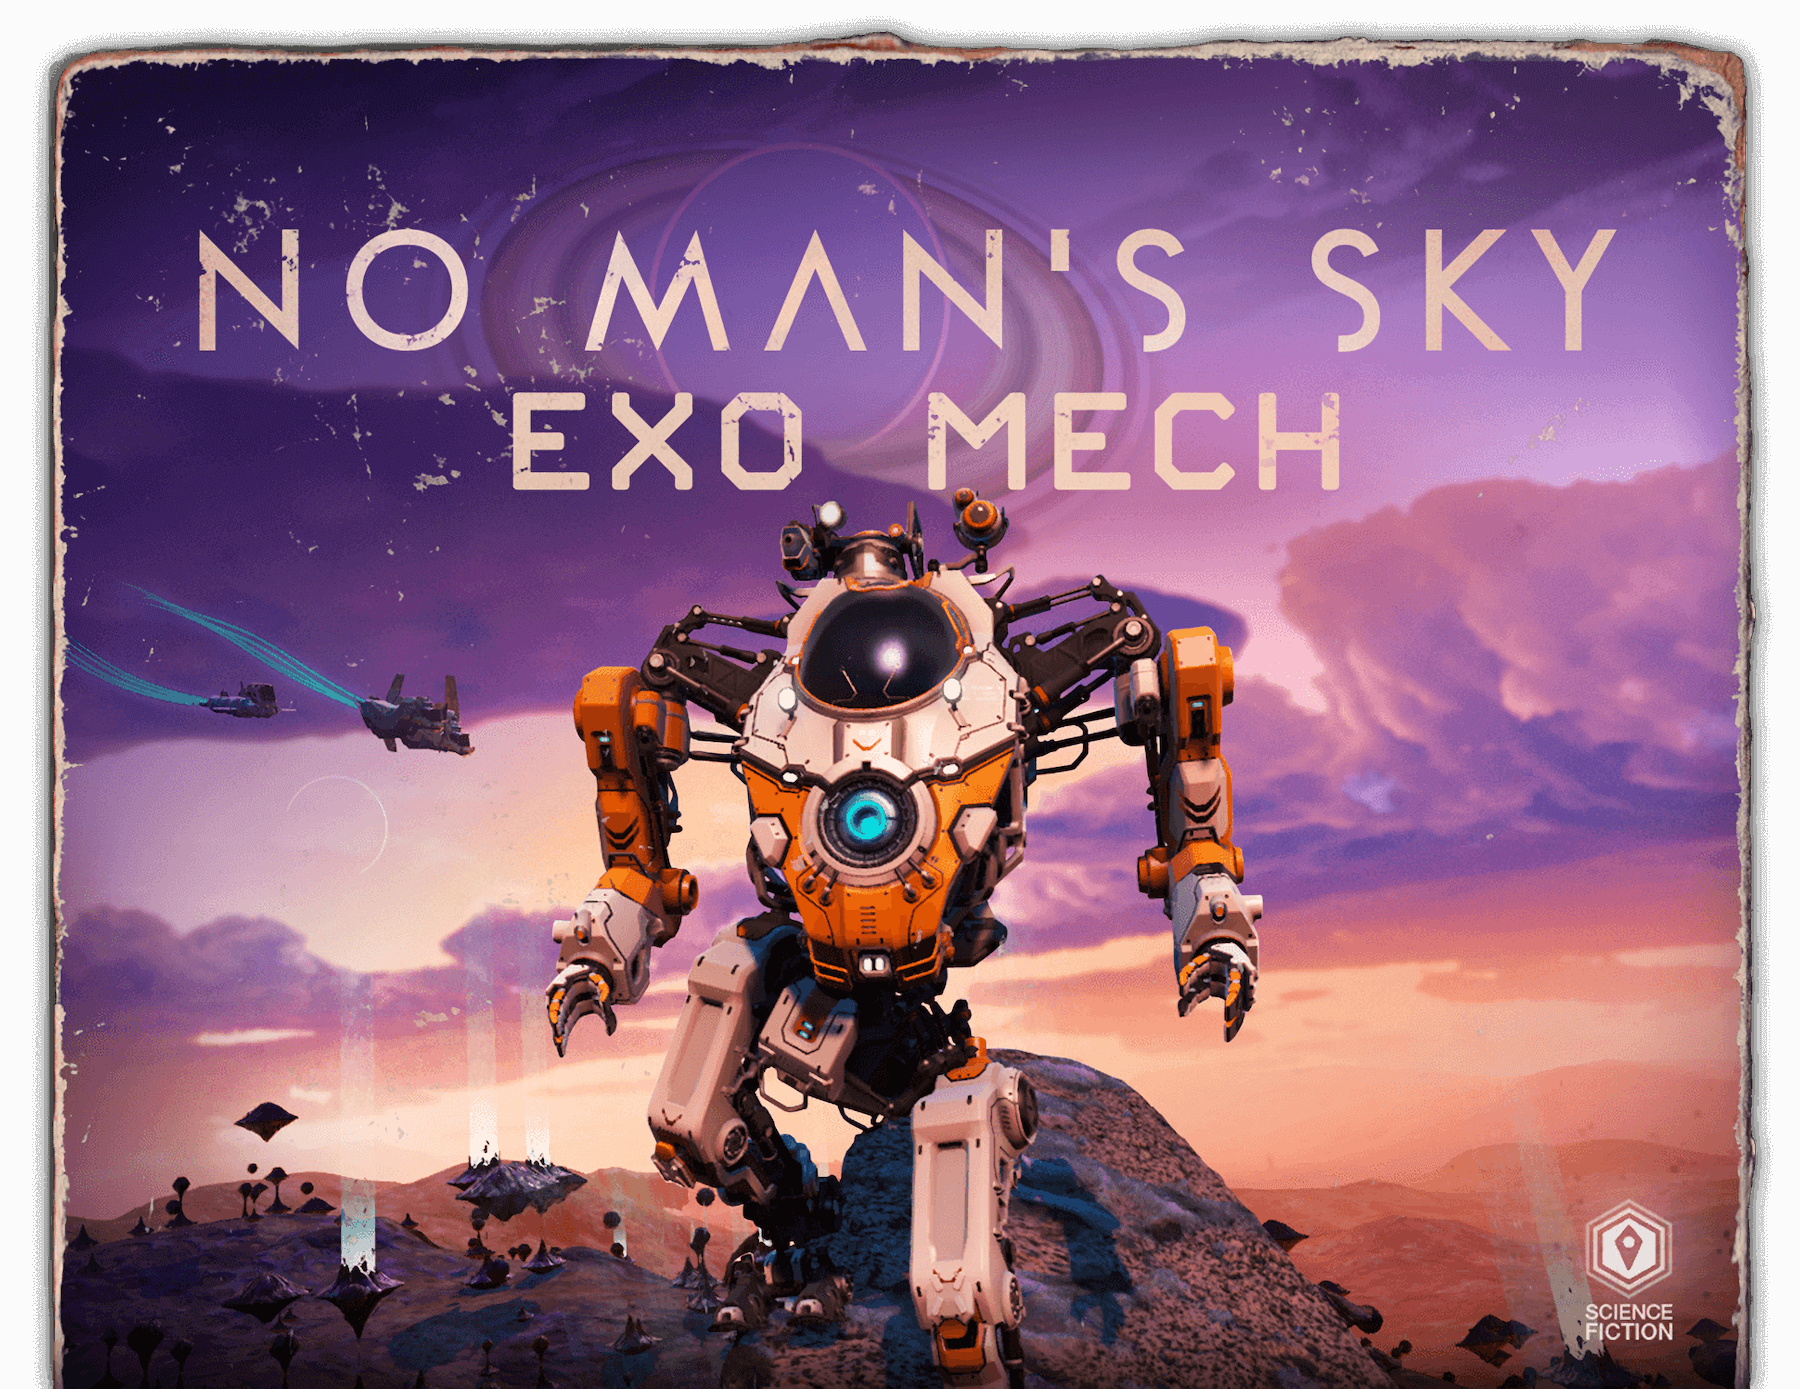 You can pilot a huge mech in No Man's Sky starting today